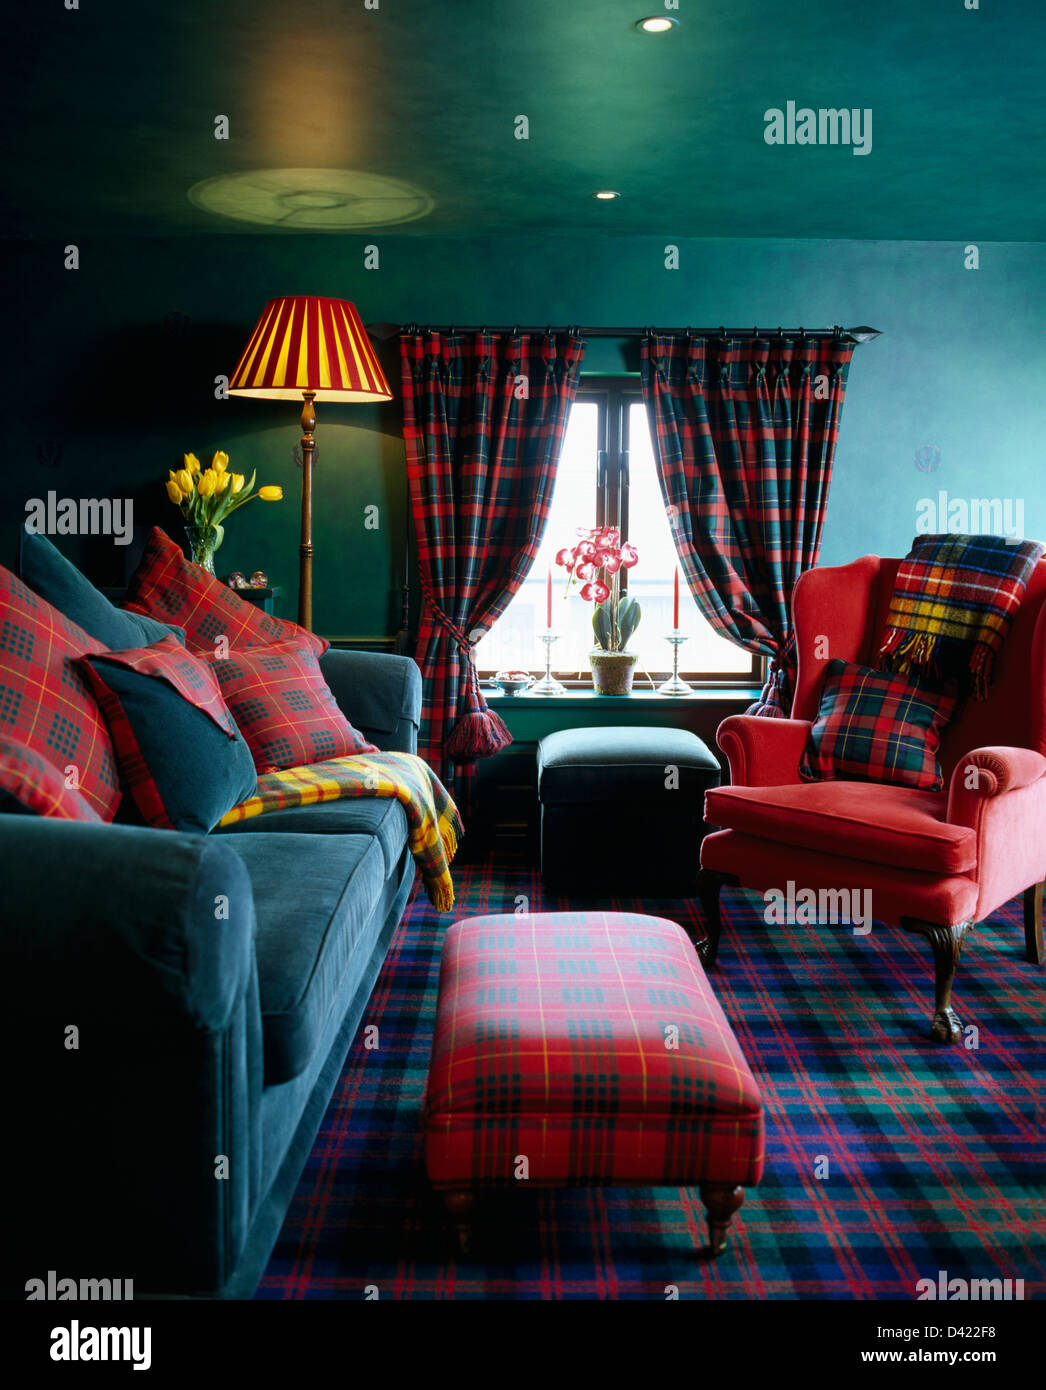 Red tartan upholstered stool and matching cushions on turquoise velvet sofa  and red armchair in turquoise green living room Stock Photo - Alamy